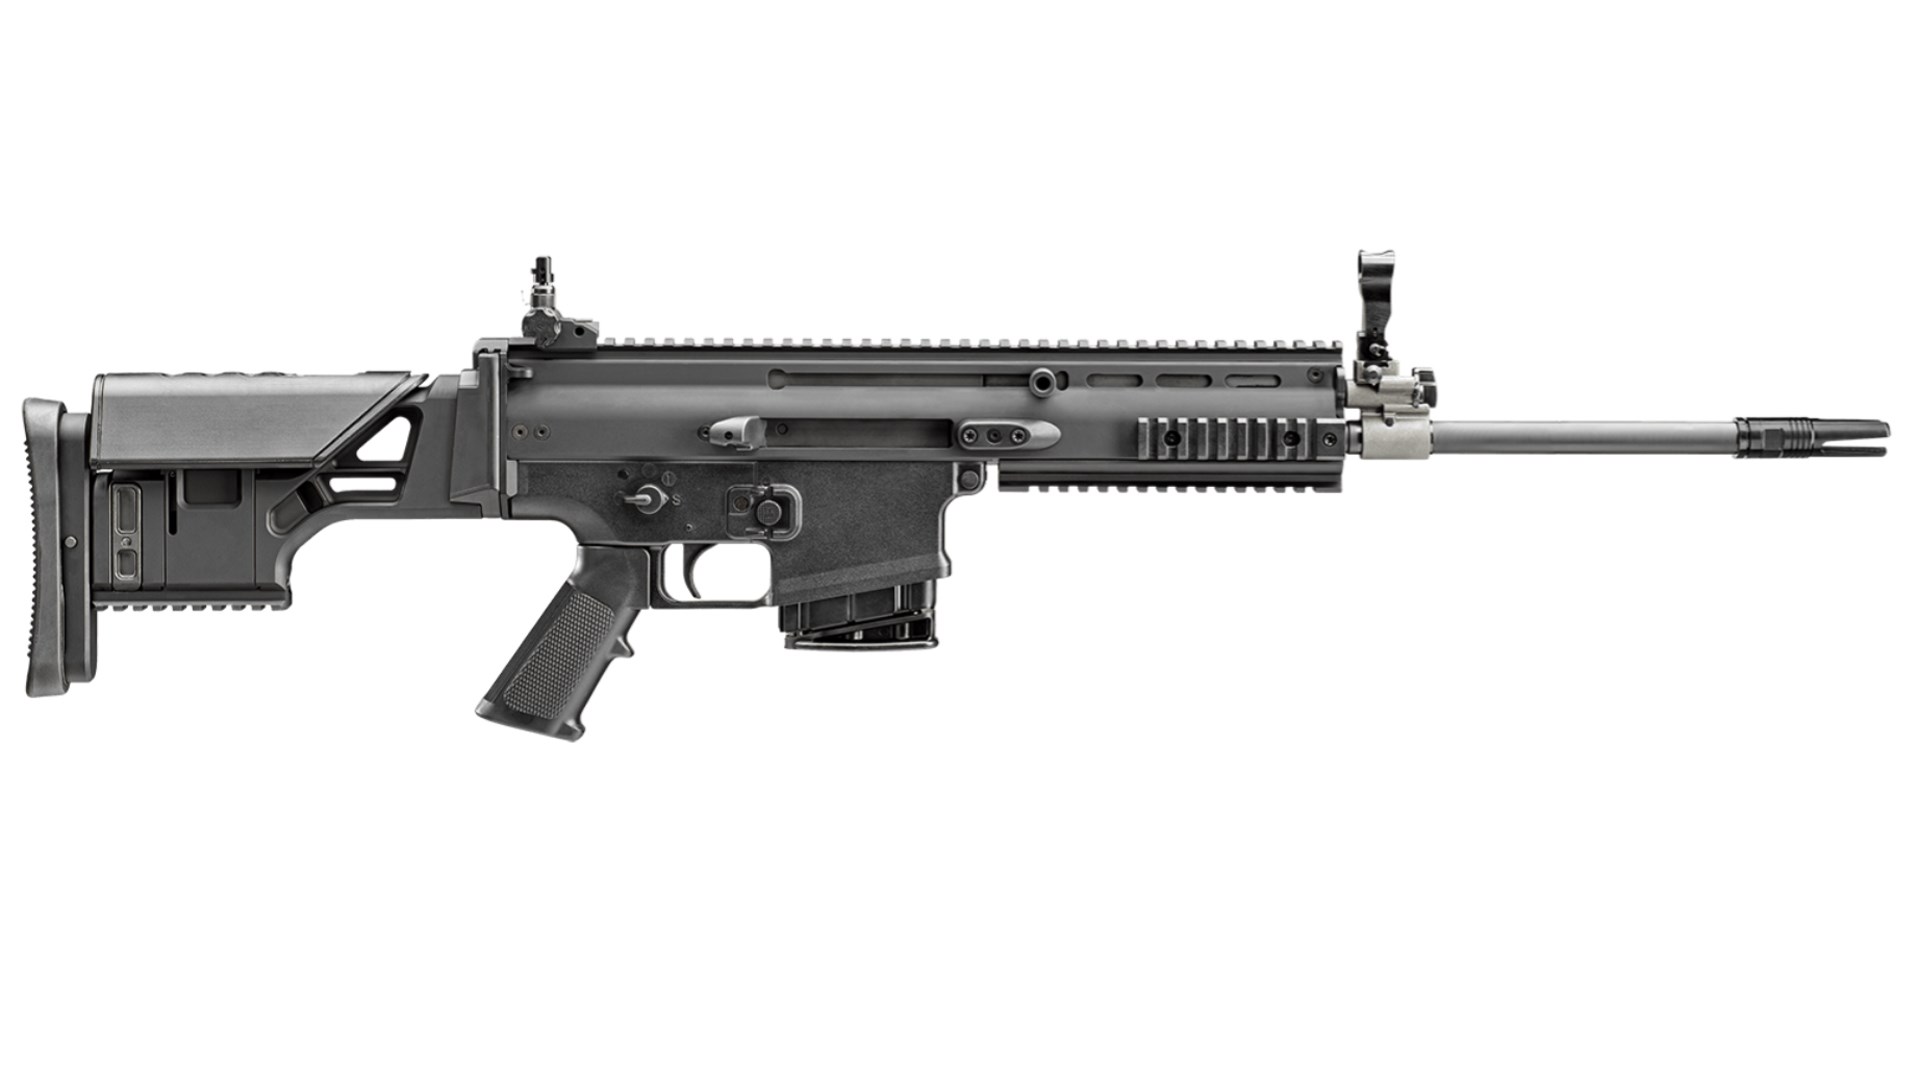 Right side of the all-black FN America SCAR 17S DMR rifle.